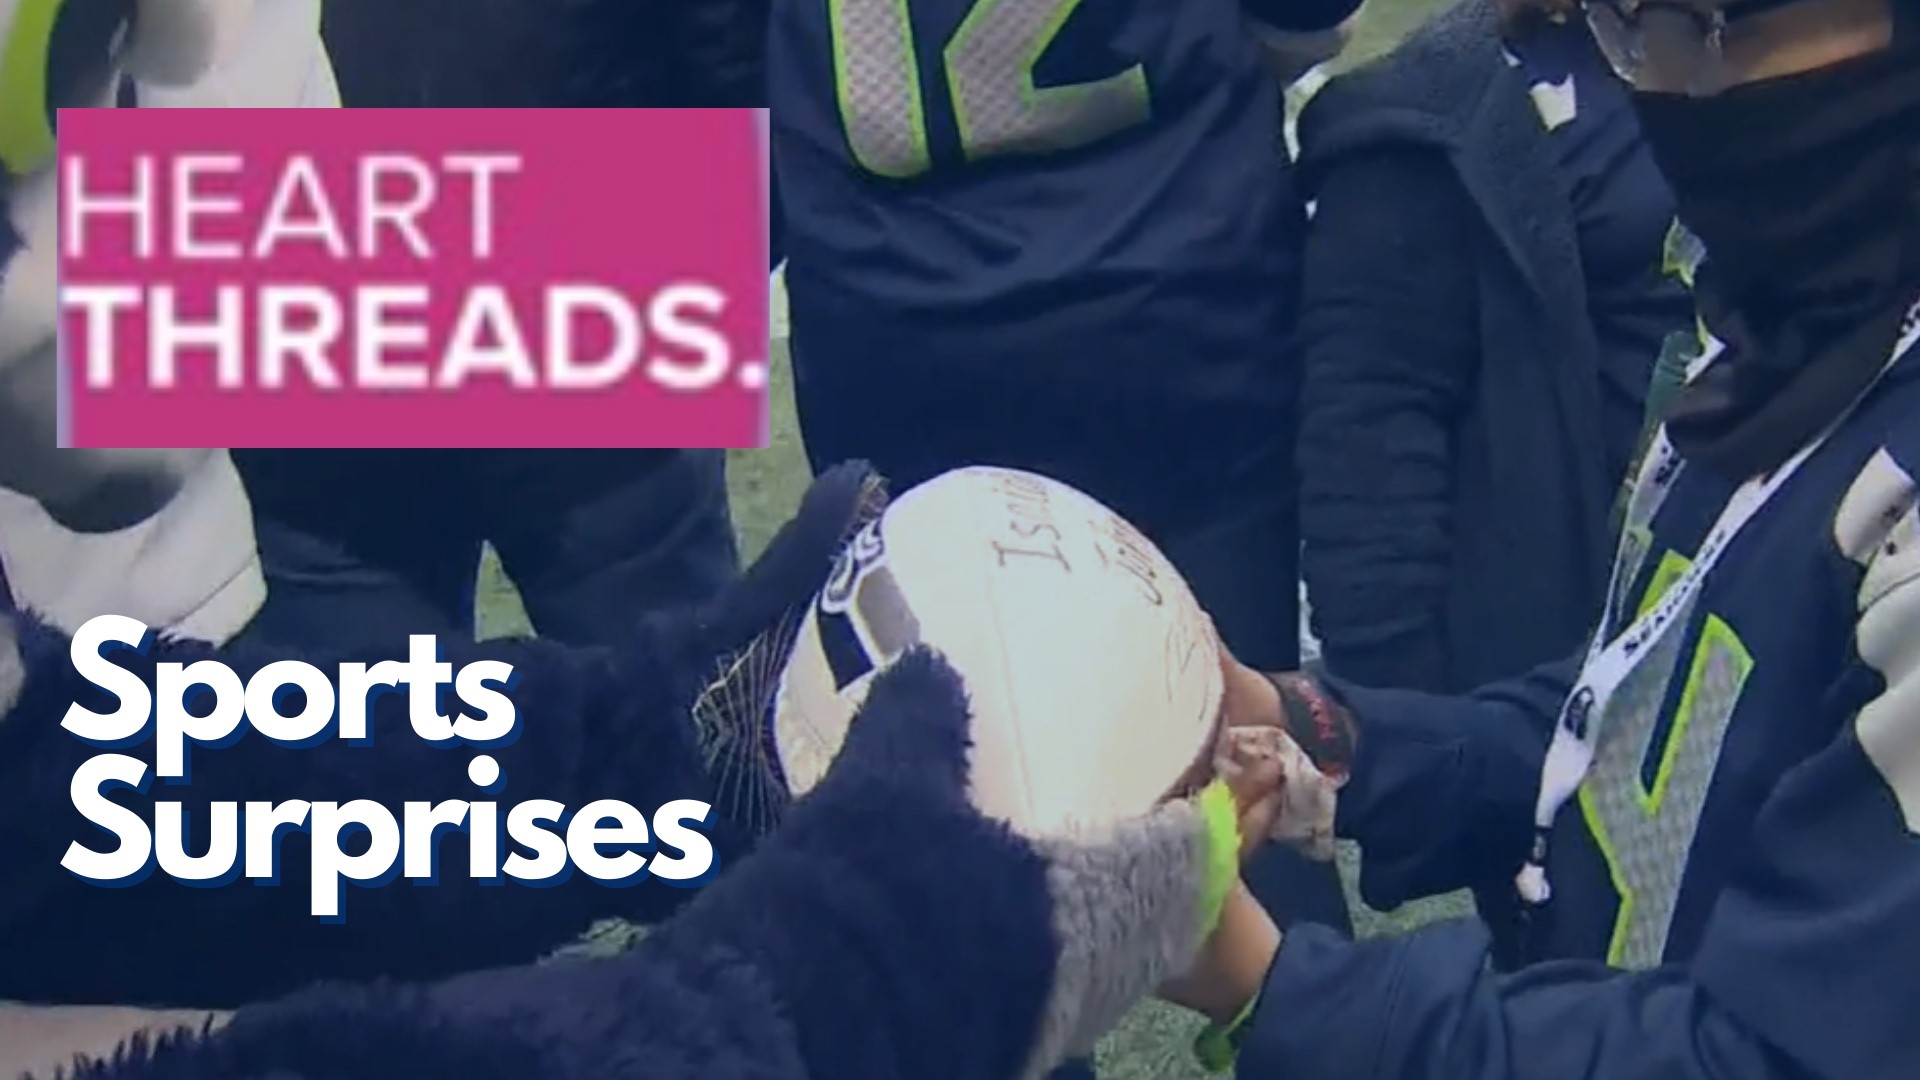 A collection of stories filled with surprises for sports fans